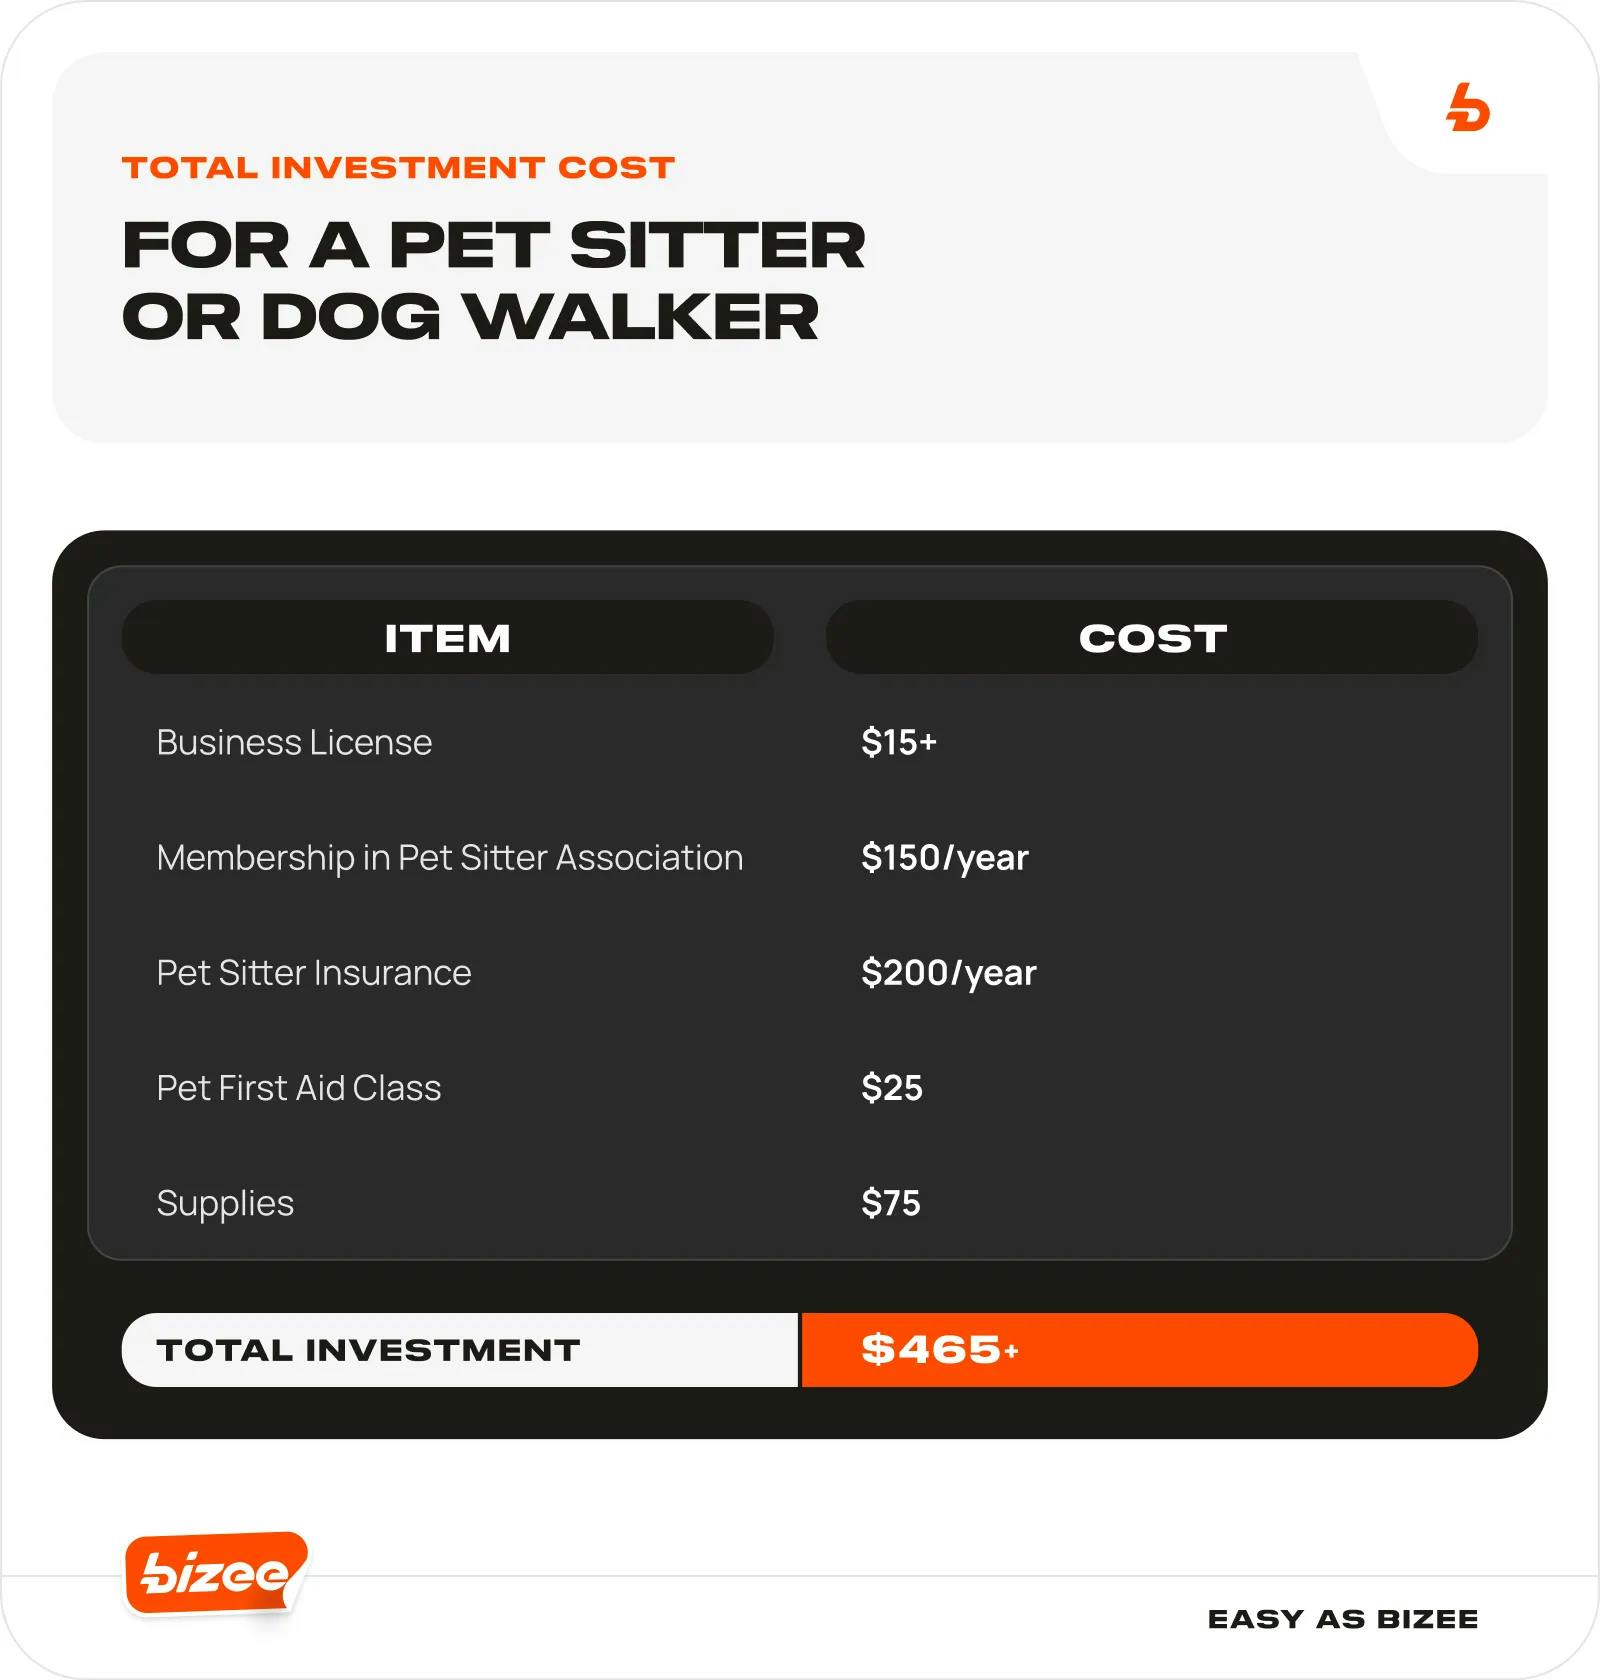 Total investment cost for a pet sitter or dog walker. Business license $15, membership in pet sitter association $150/year, insurance $200, first aid class $25, supplies $75.